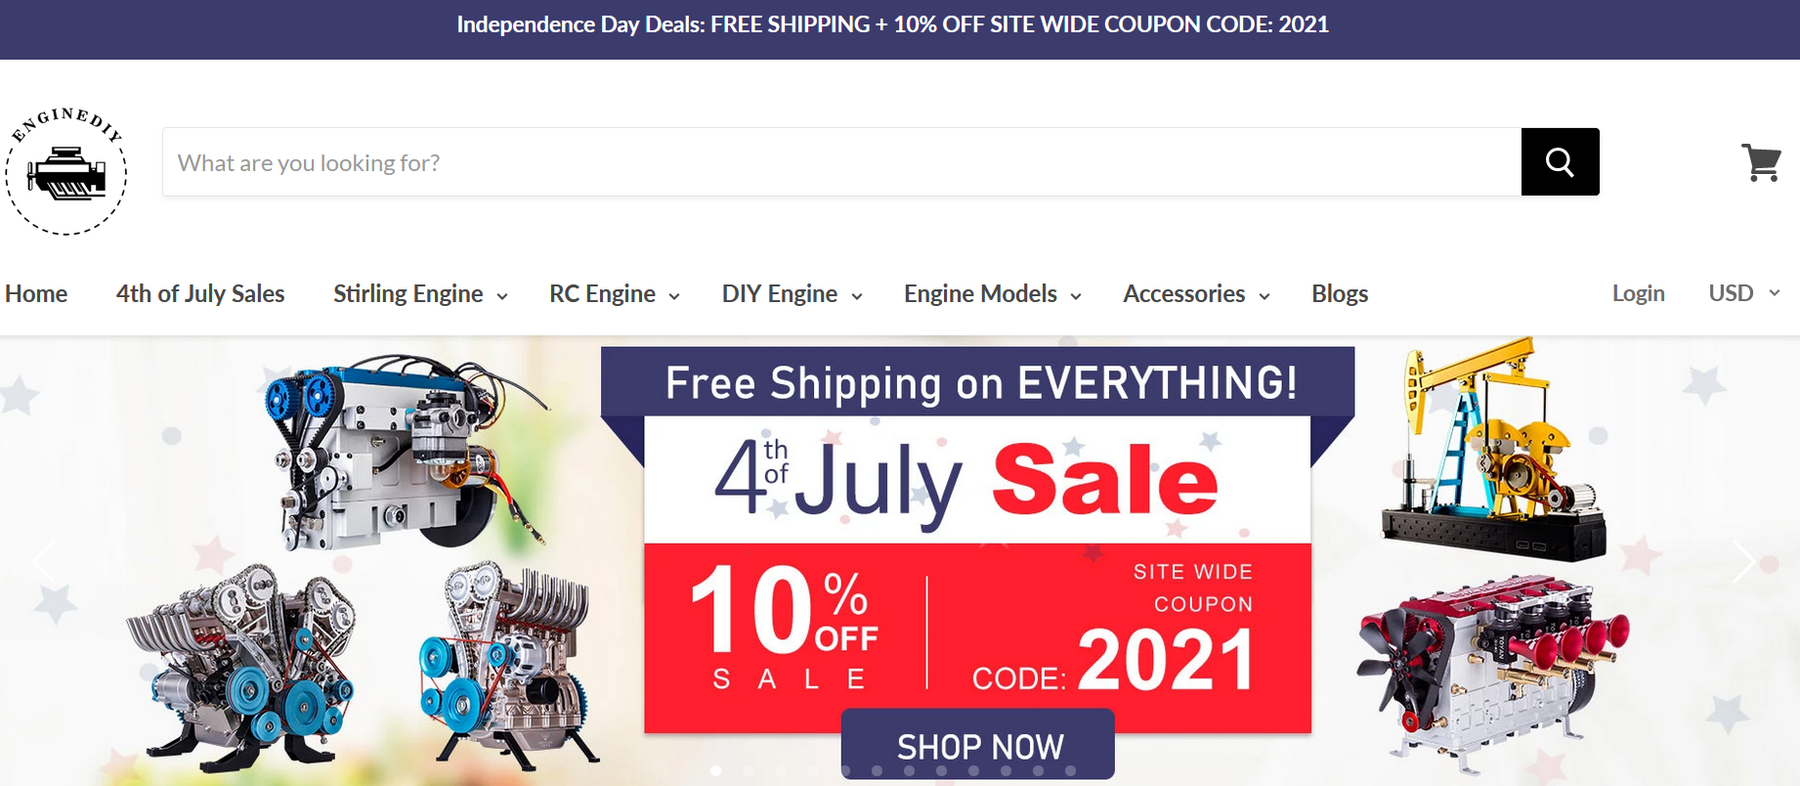 Independence Day Deals - Freedom and Equality - Choose what you like from EngineDIY